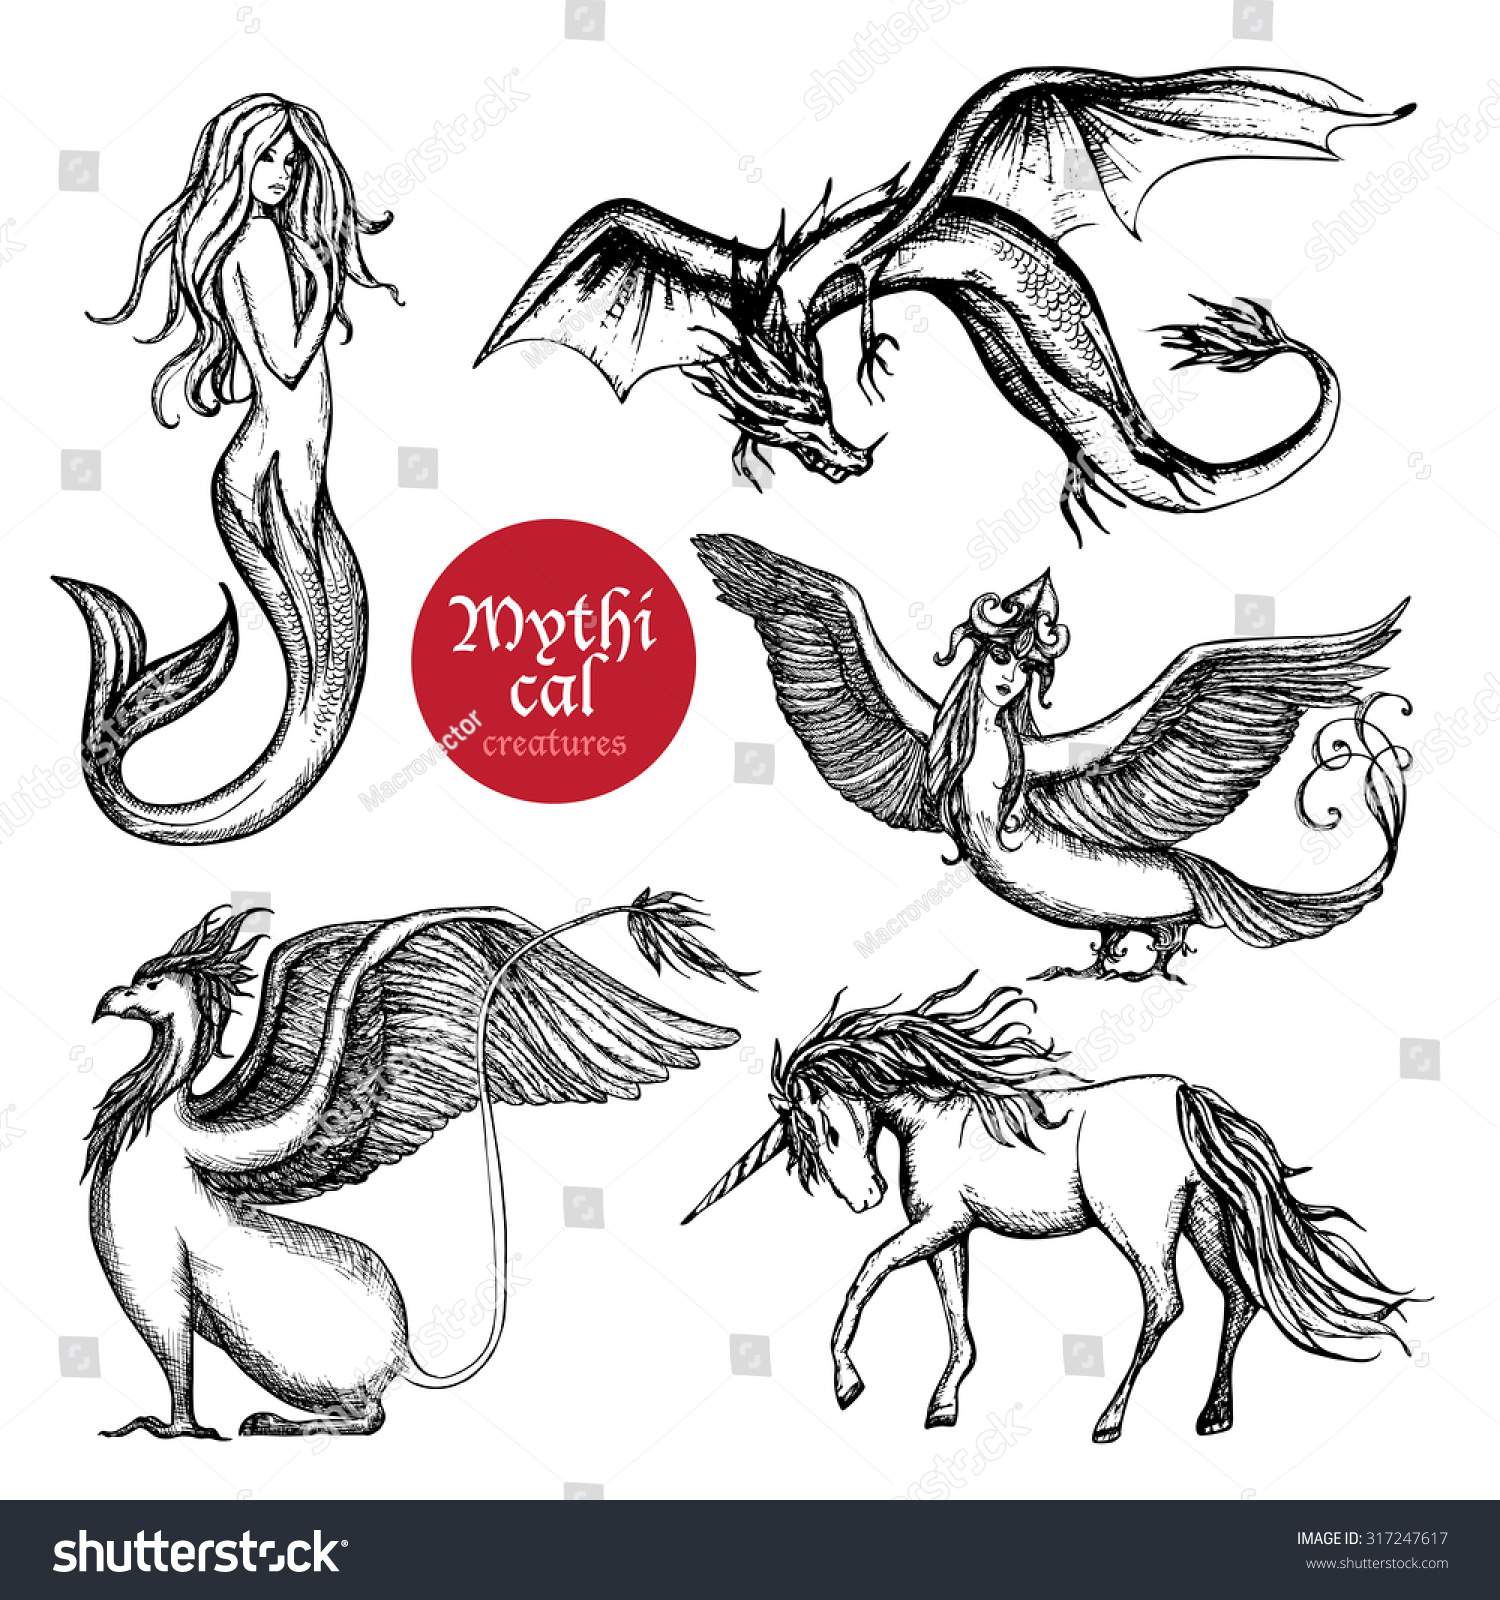 Mythical Creatures Hand Drawn Sketch Set Stock Vector (Royalty Free